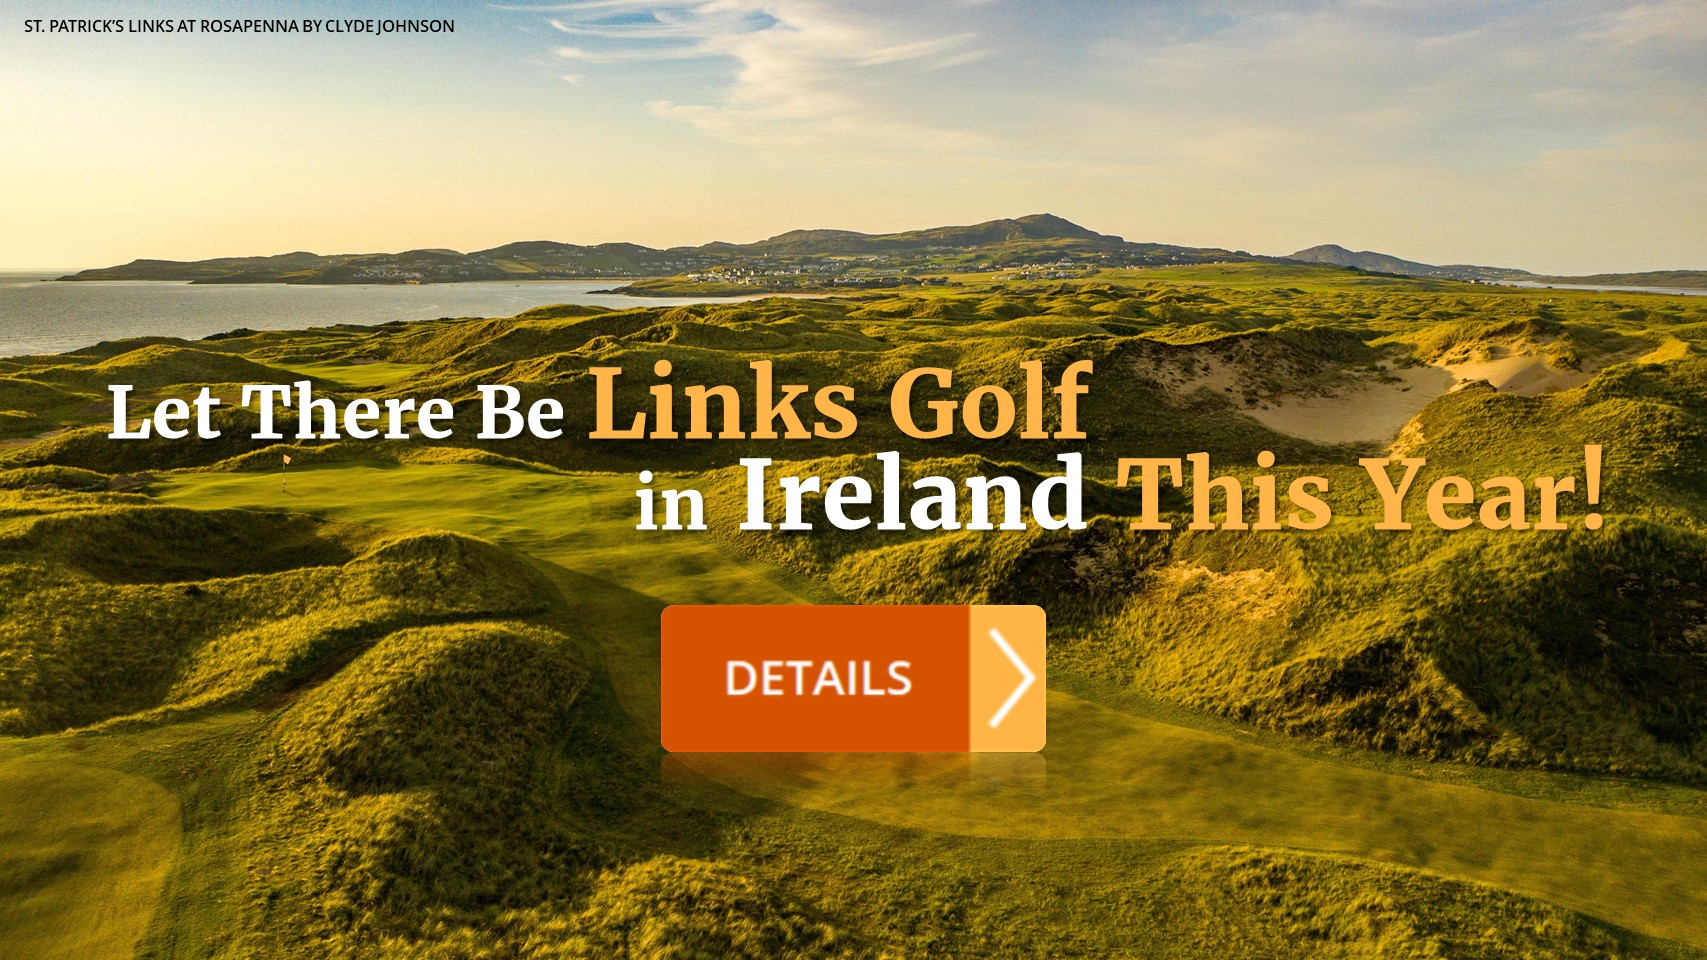 YES! Let There Be Links Golf in Ireland This Year! - PerryGolf.com